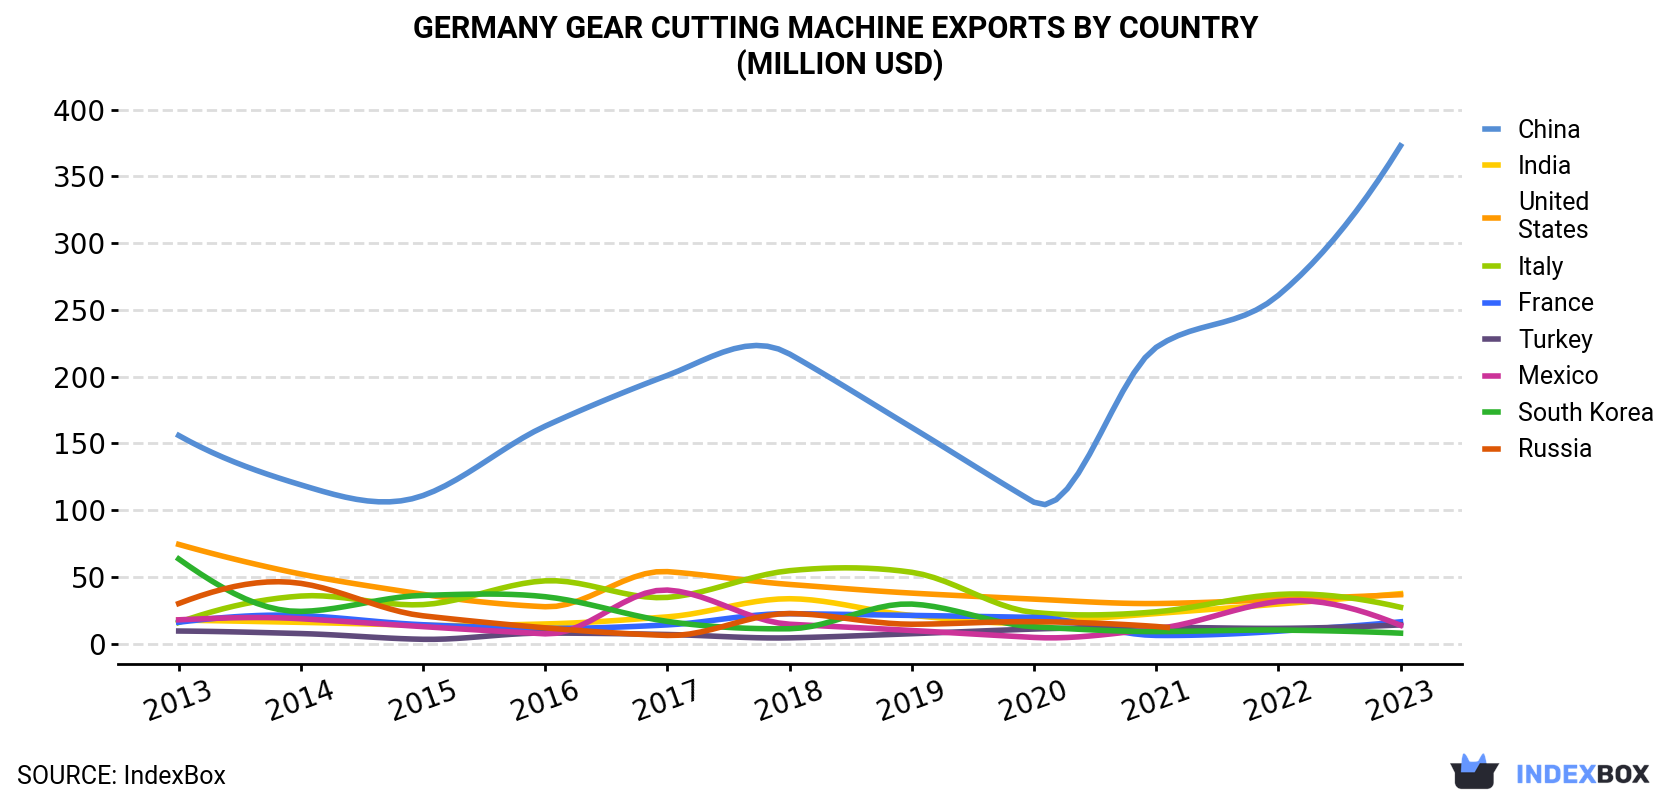 Germany Gear Cutting Machine Exports By Country (Million USD)